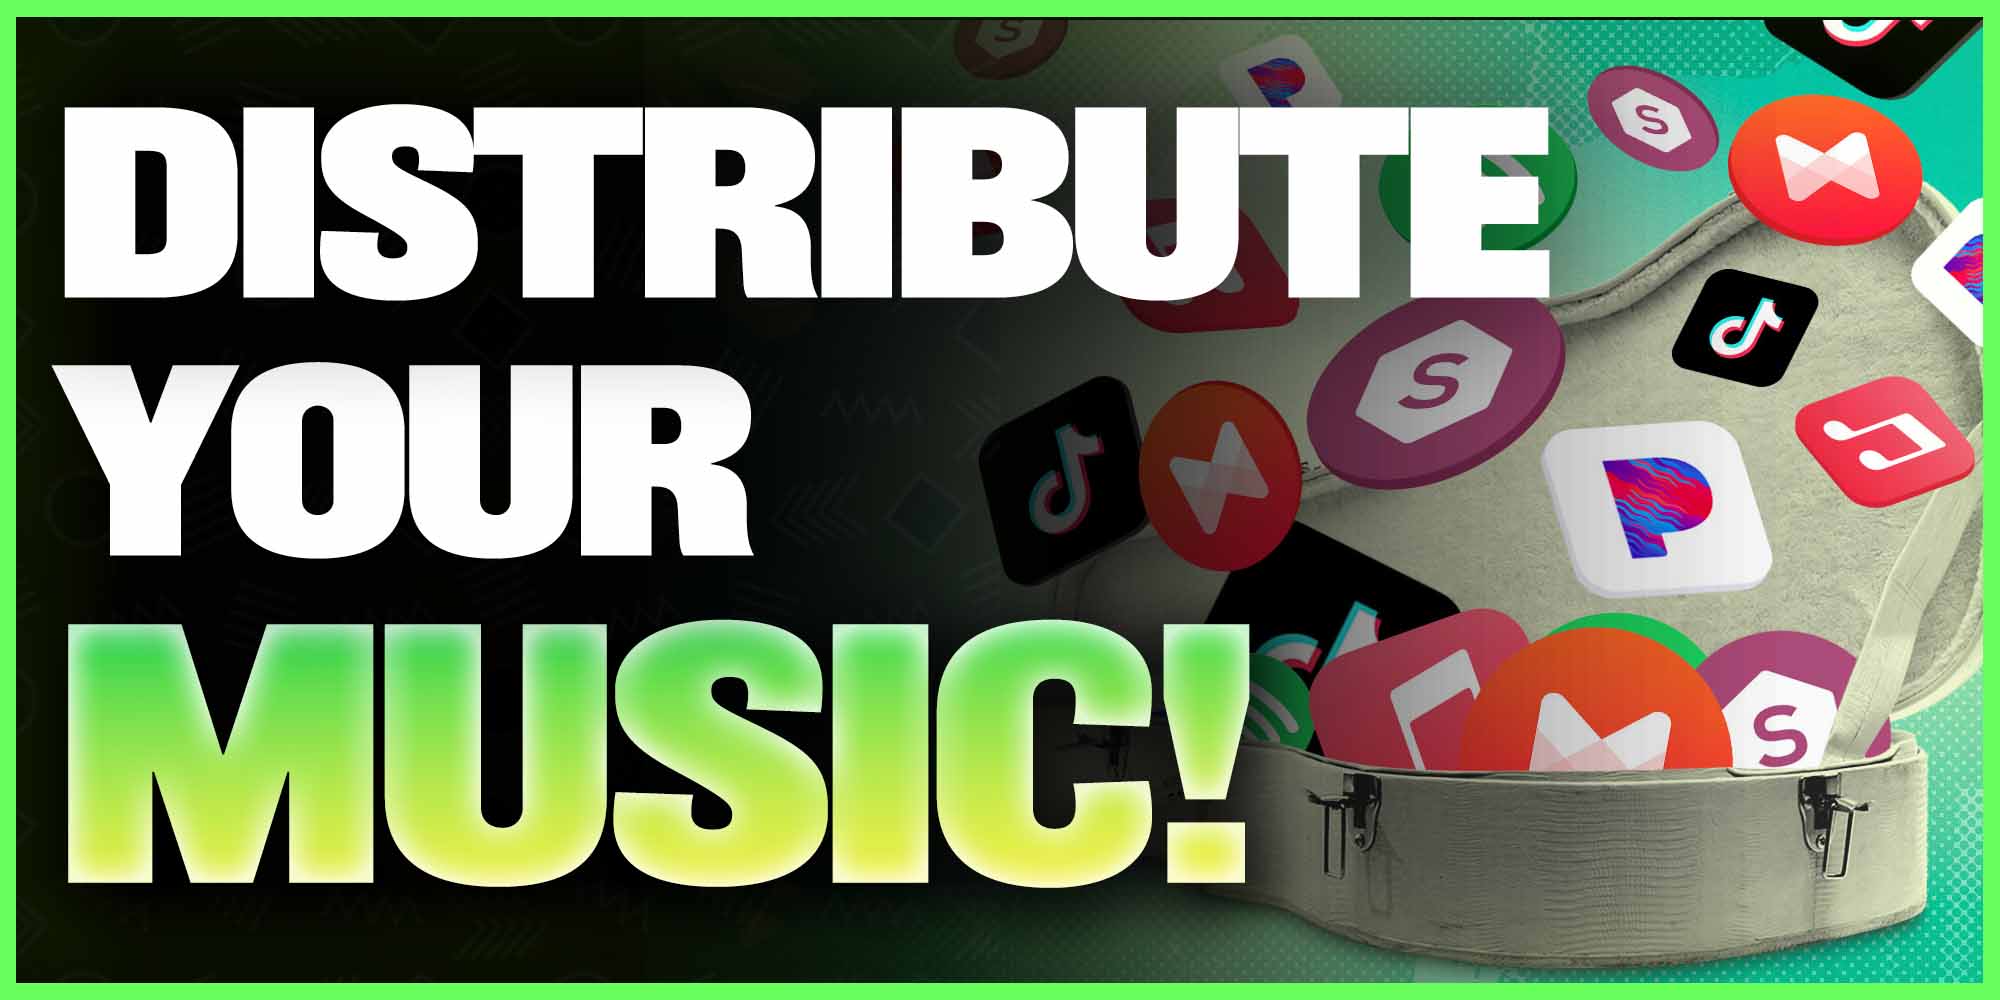 How to Publish Your Music on Spotify and Get Streams